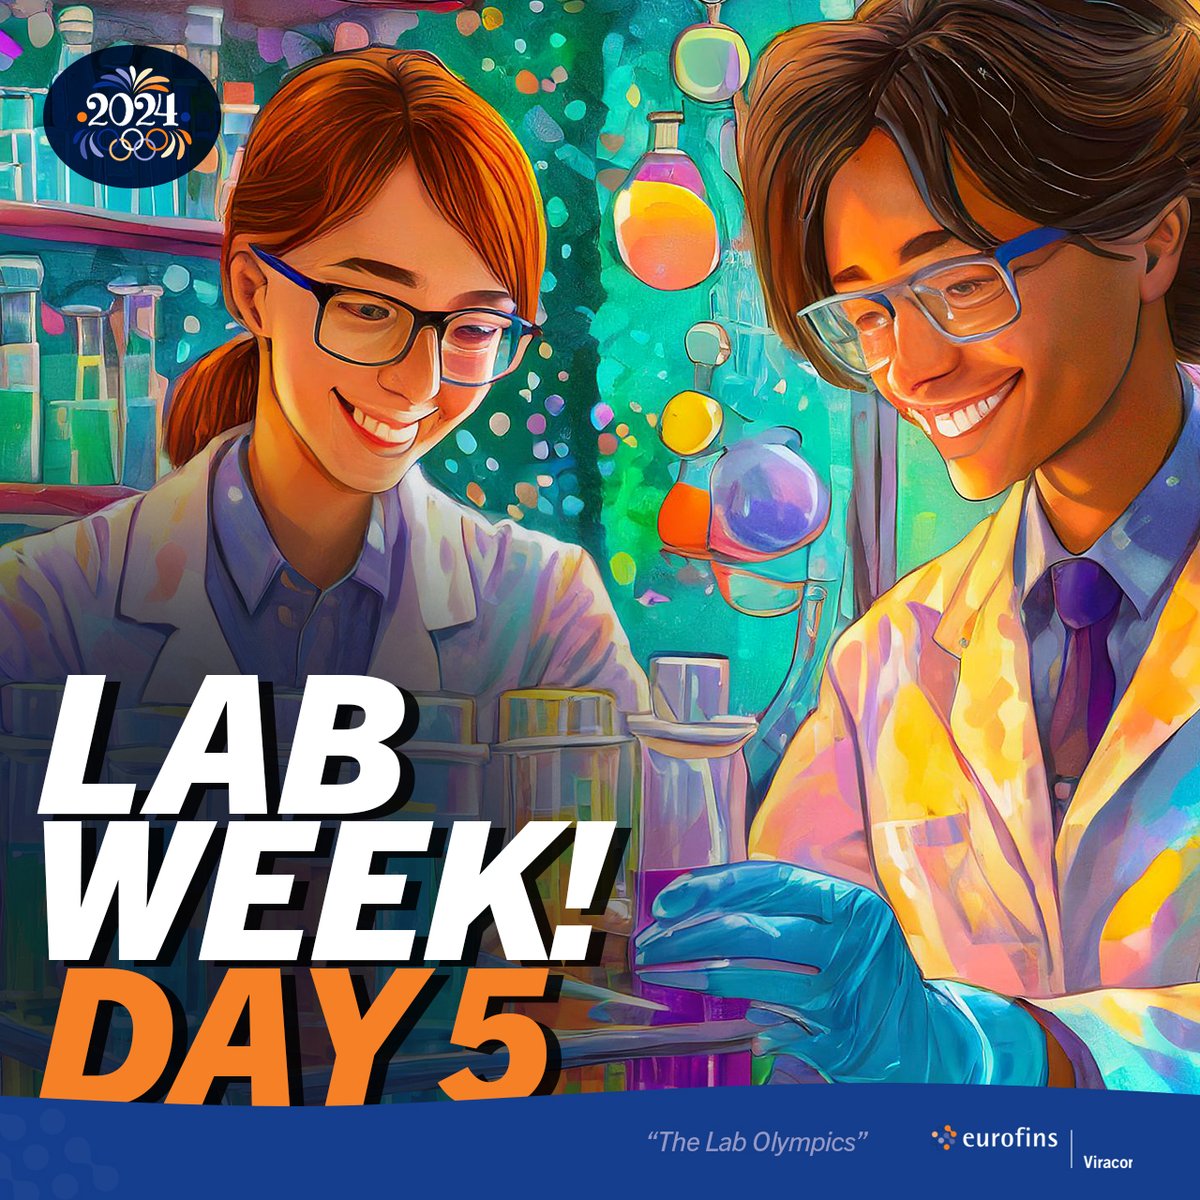 It's day 5 of #LabWeek2024! Today is also #TakeYourKidsToWorkDay here at Eurofins Viracor Laboratory HQ, which means it's also a great day for some jokes! ❓ Why don't scientists trust atoms? Because they make up everything! ❓ How does a scientist freshen her breath? With…